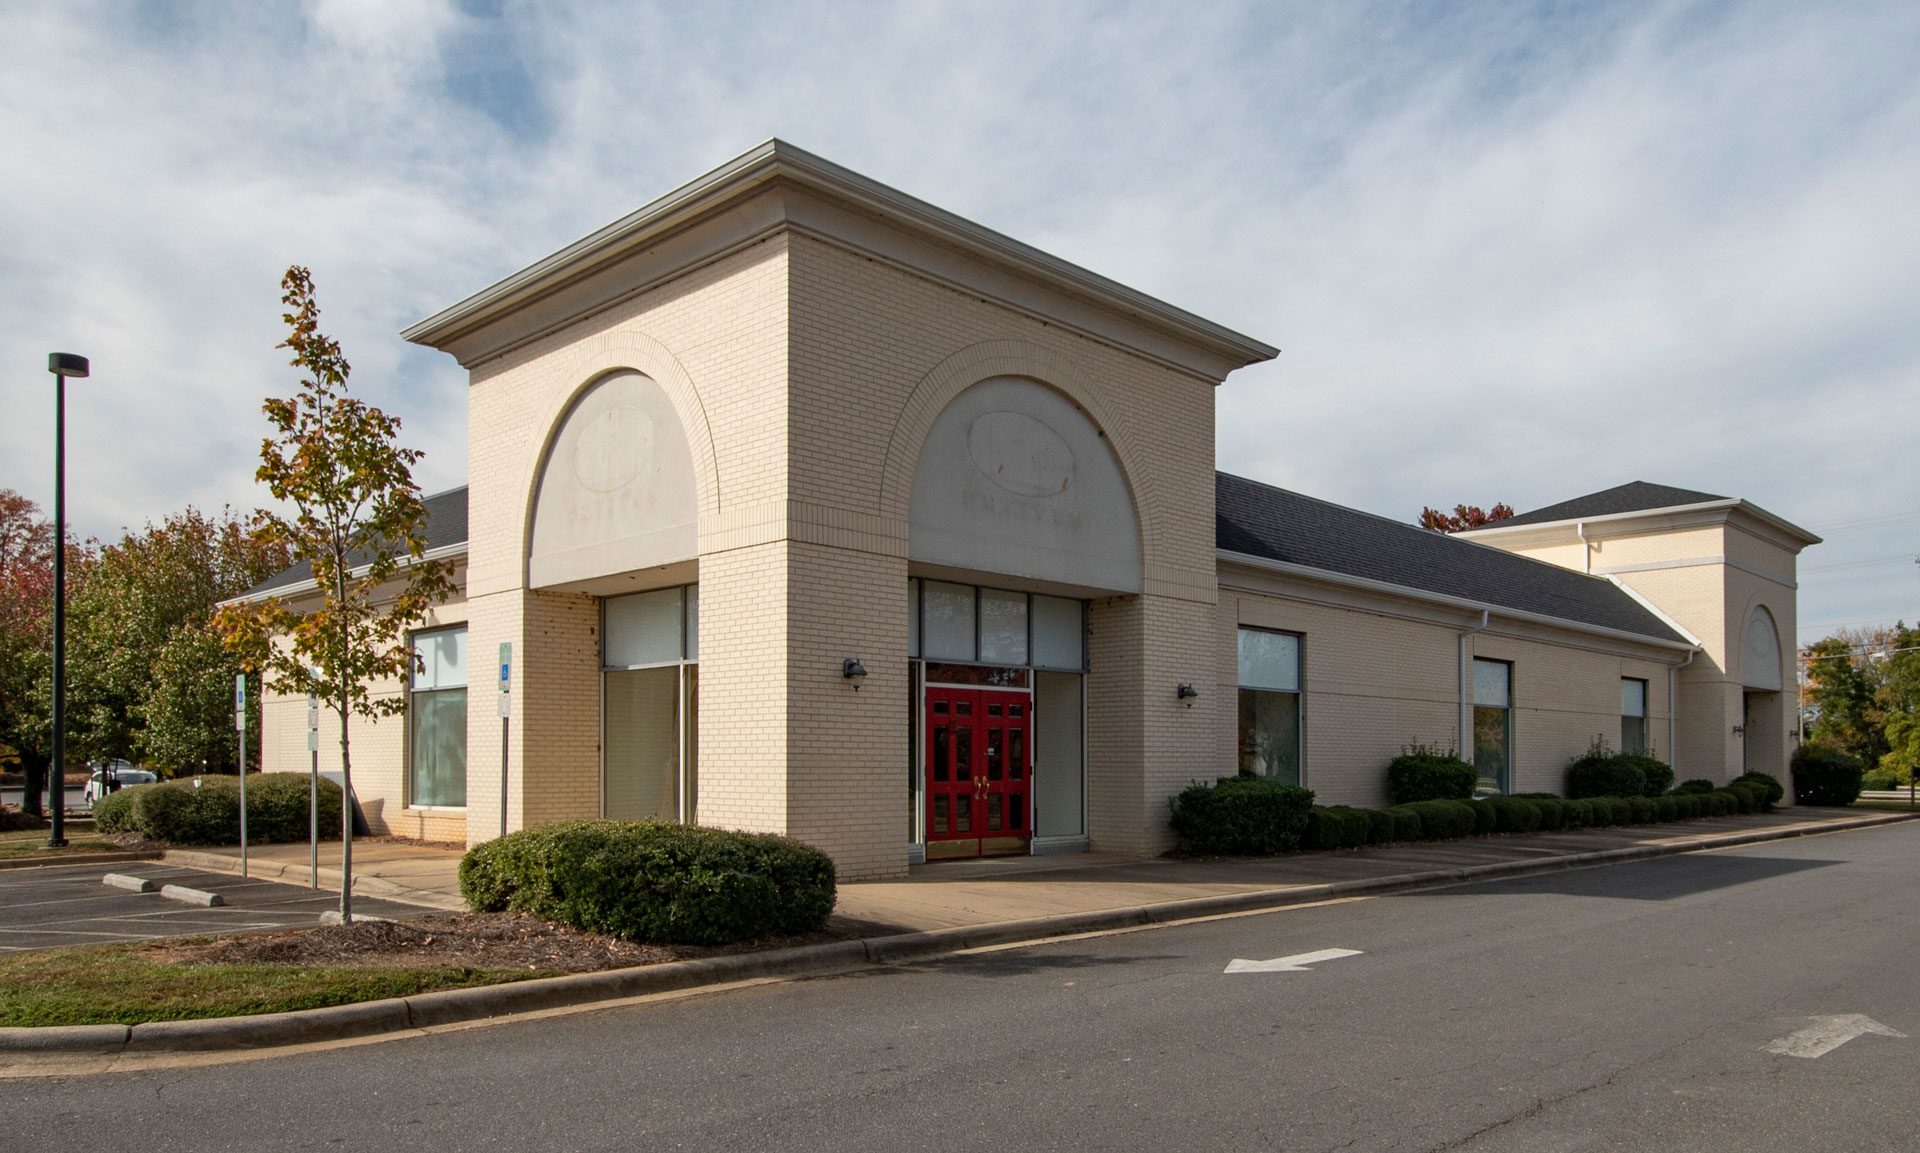 9835 Pineville-Matthews Road light brick 1-story retail building with red doors exterior